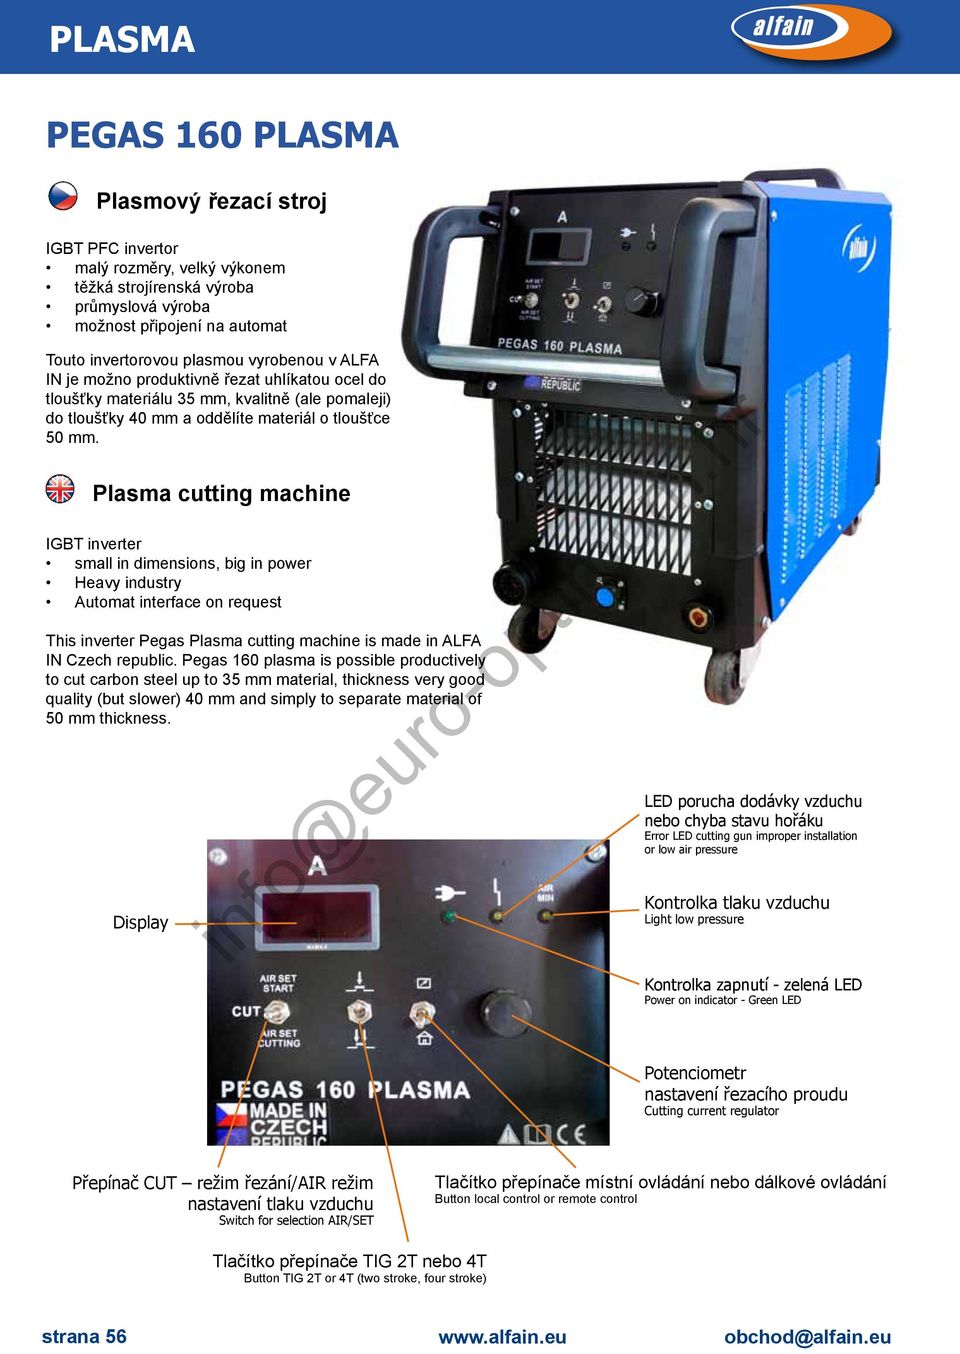 Plasma cutting machine IGBT inverter small in dimensions, big in power Heavy industry Automat interface on request This inverter Pegas Plasma cutting machine is made in ALFA IN Czech republic.